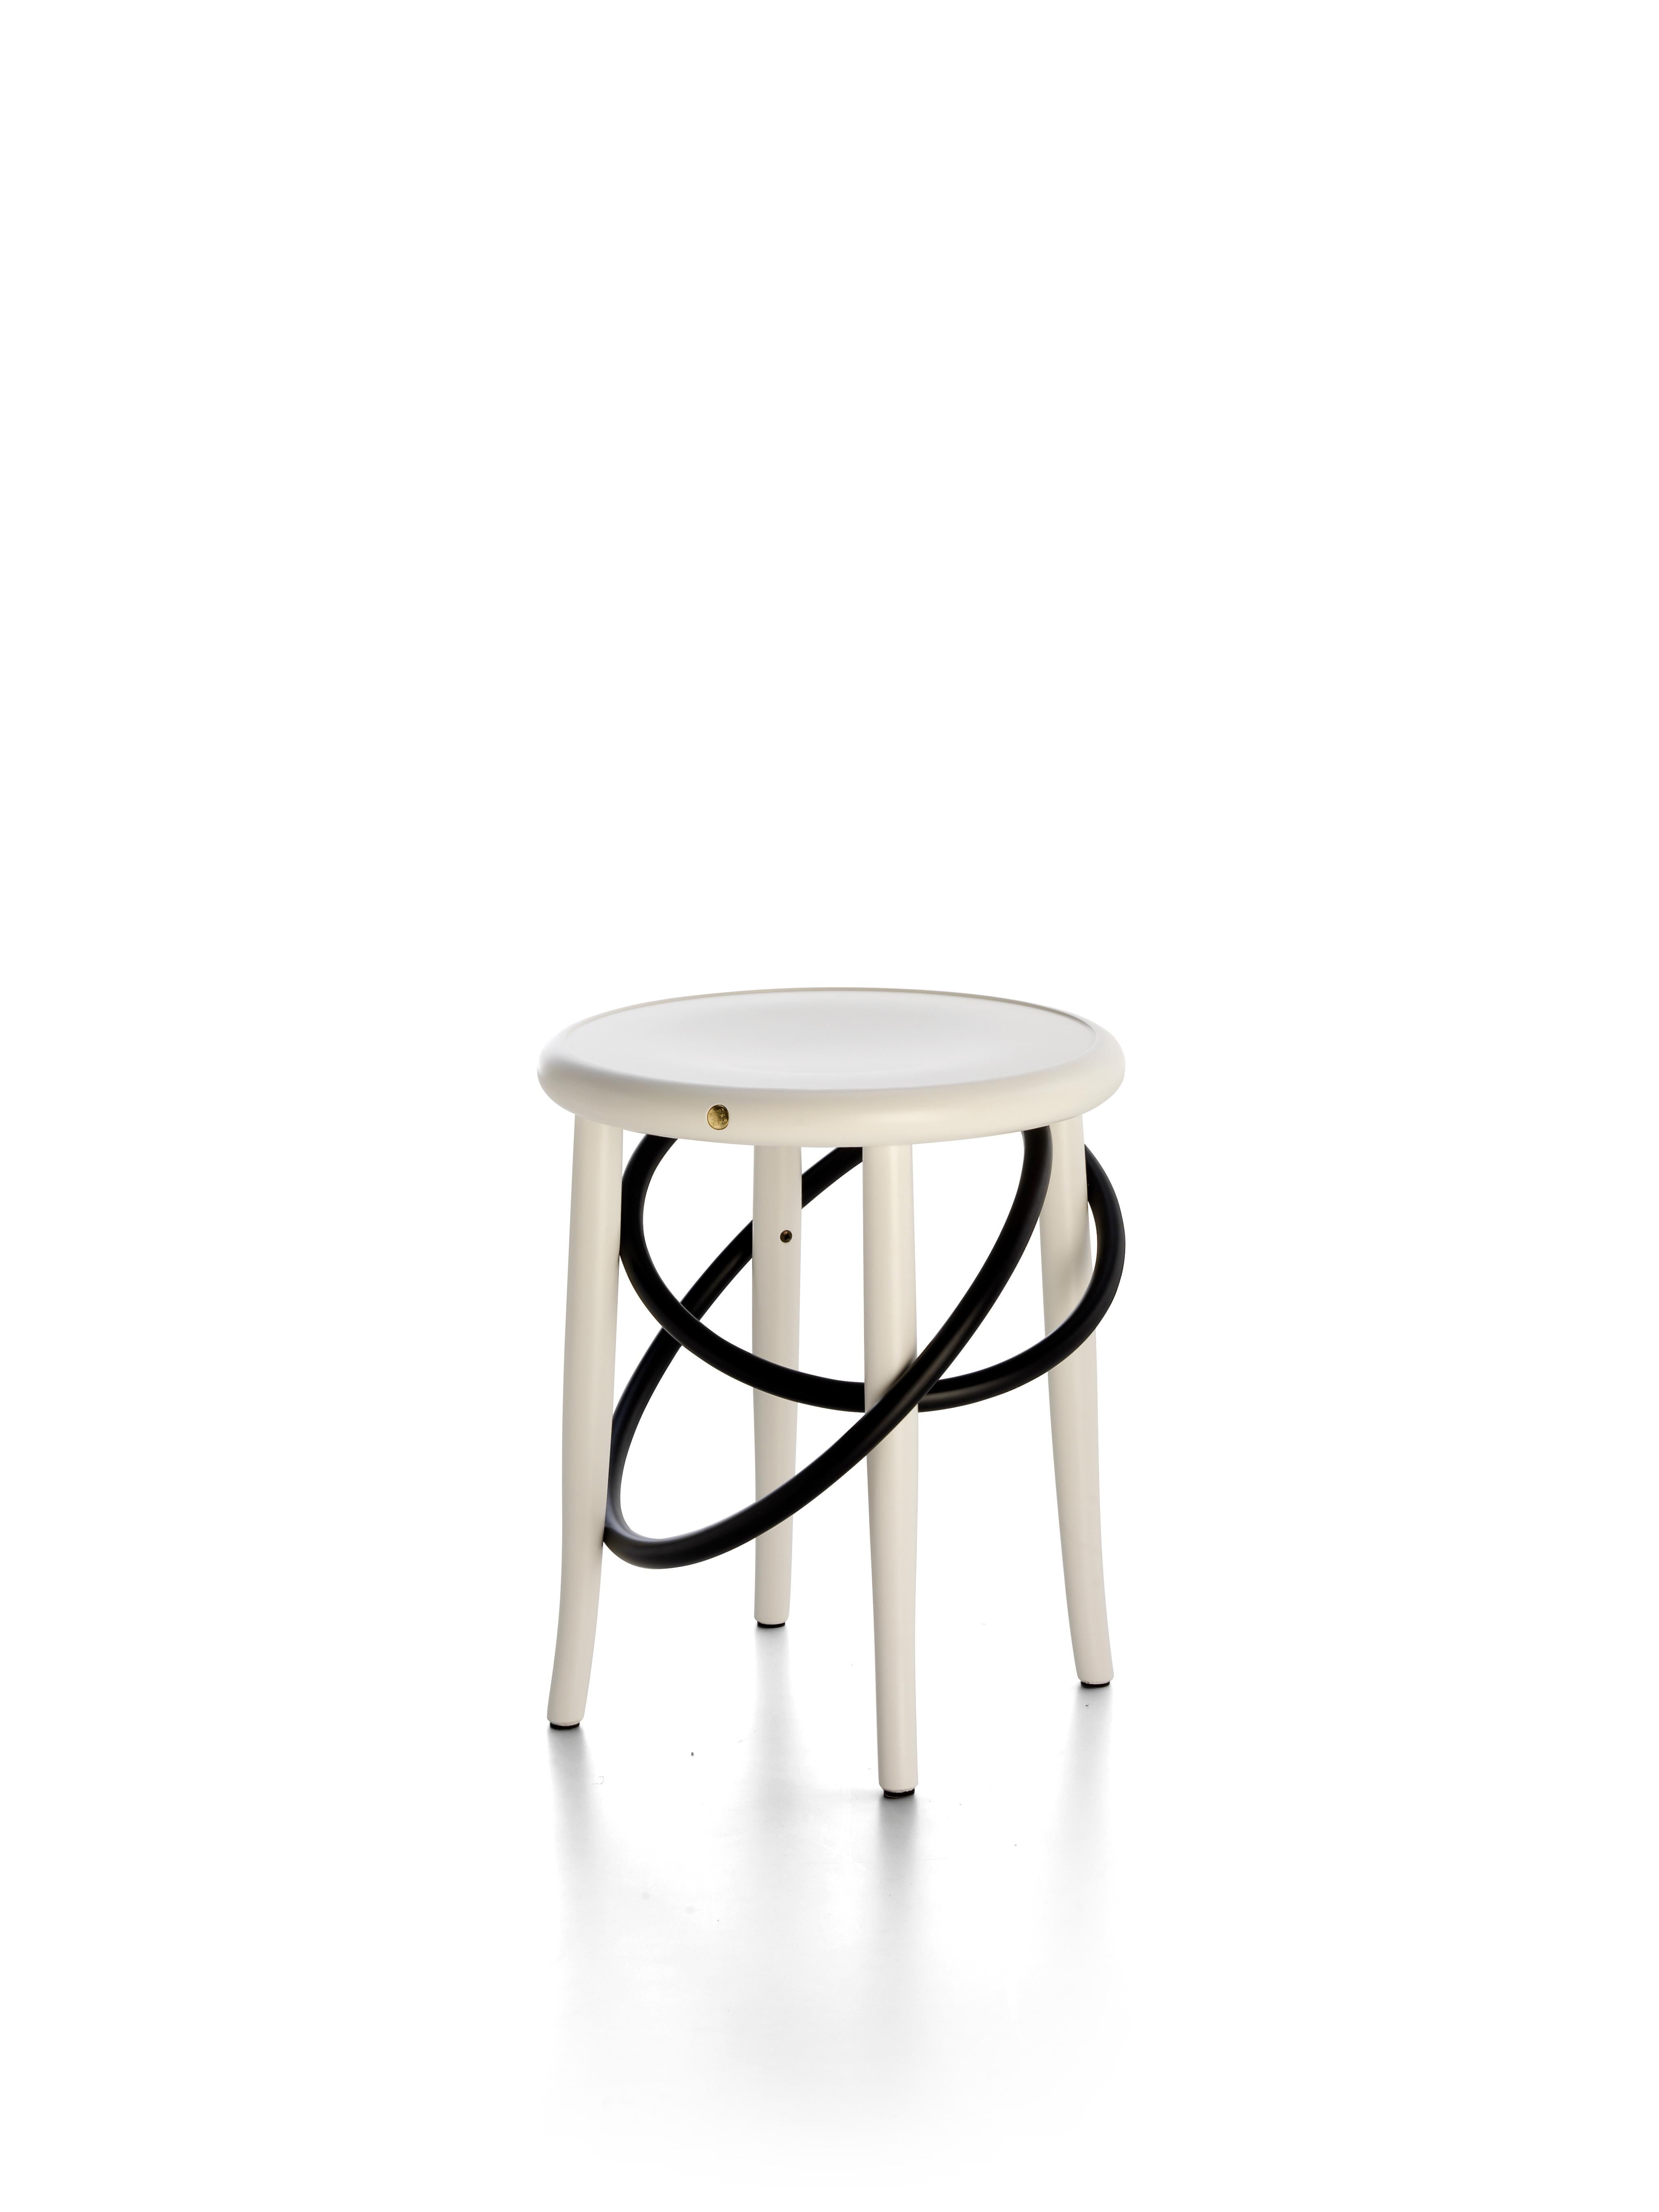 Austrian Gebrüder Thonet Vienna GmbH Cirque Low Stool in White with Black Rings For Sale